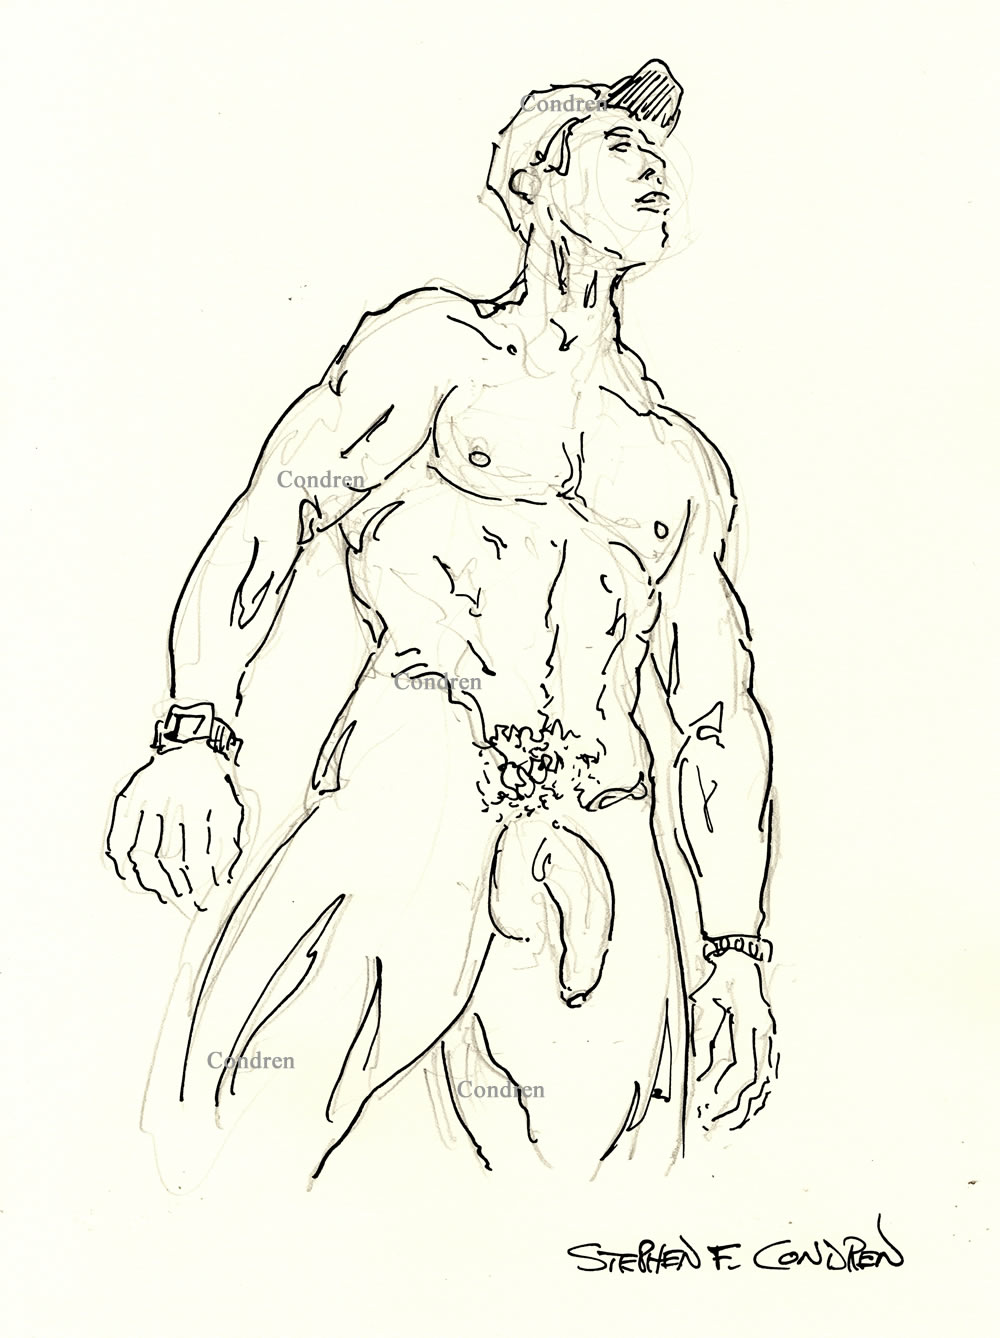 Pen & ink figure drawing of a muscular nude male with large cock. Masculine figure has a hard body and chiseled 6-pack abs.